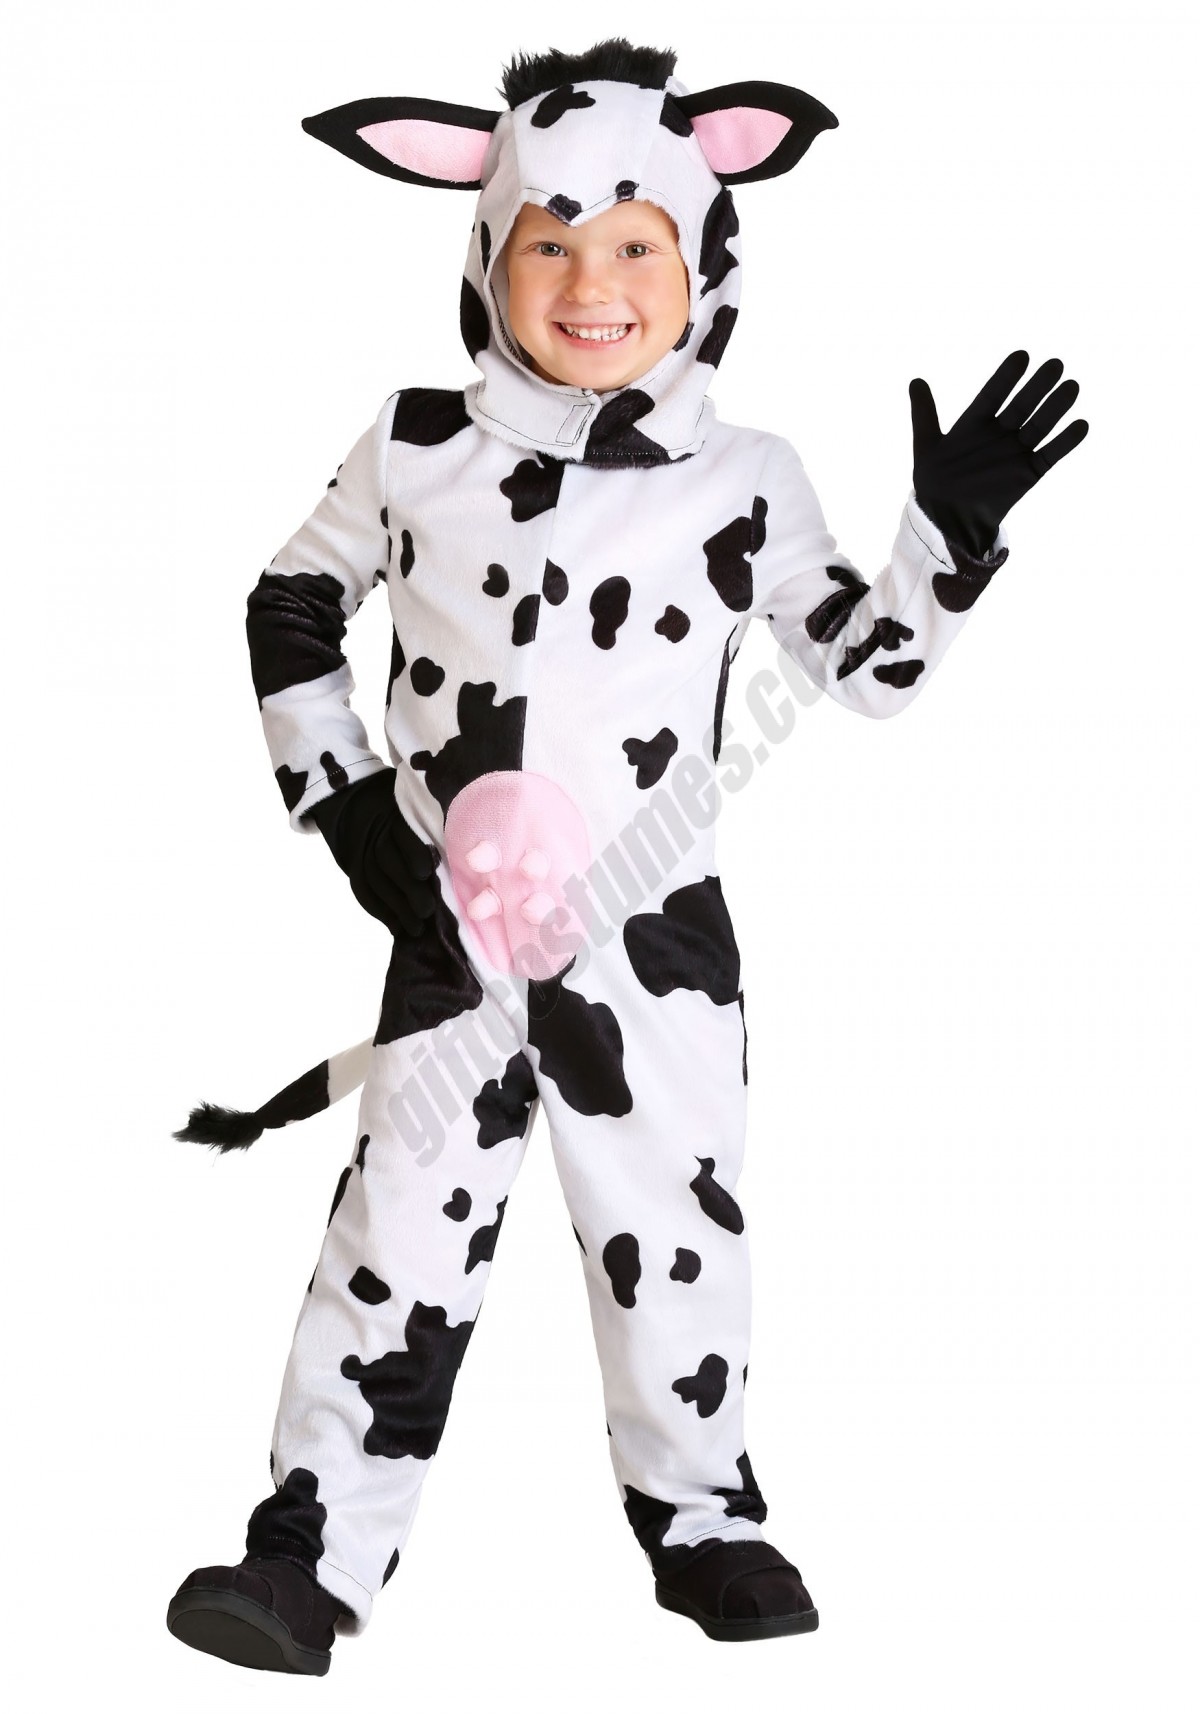 Toddler's Cow Costume Promotions - -0